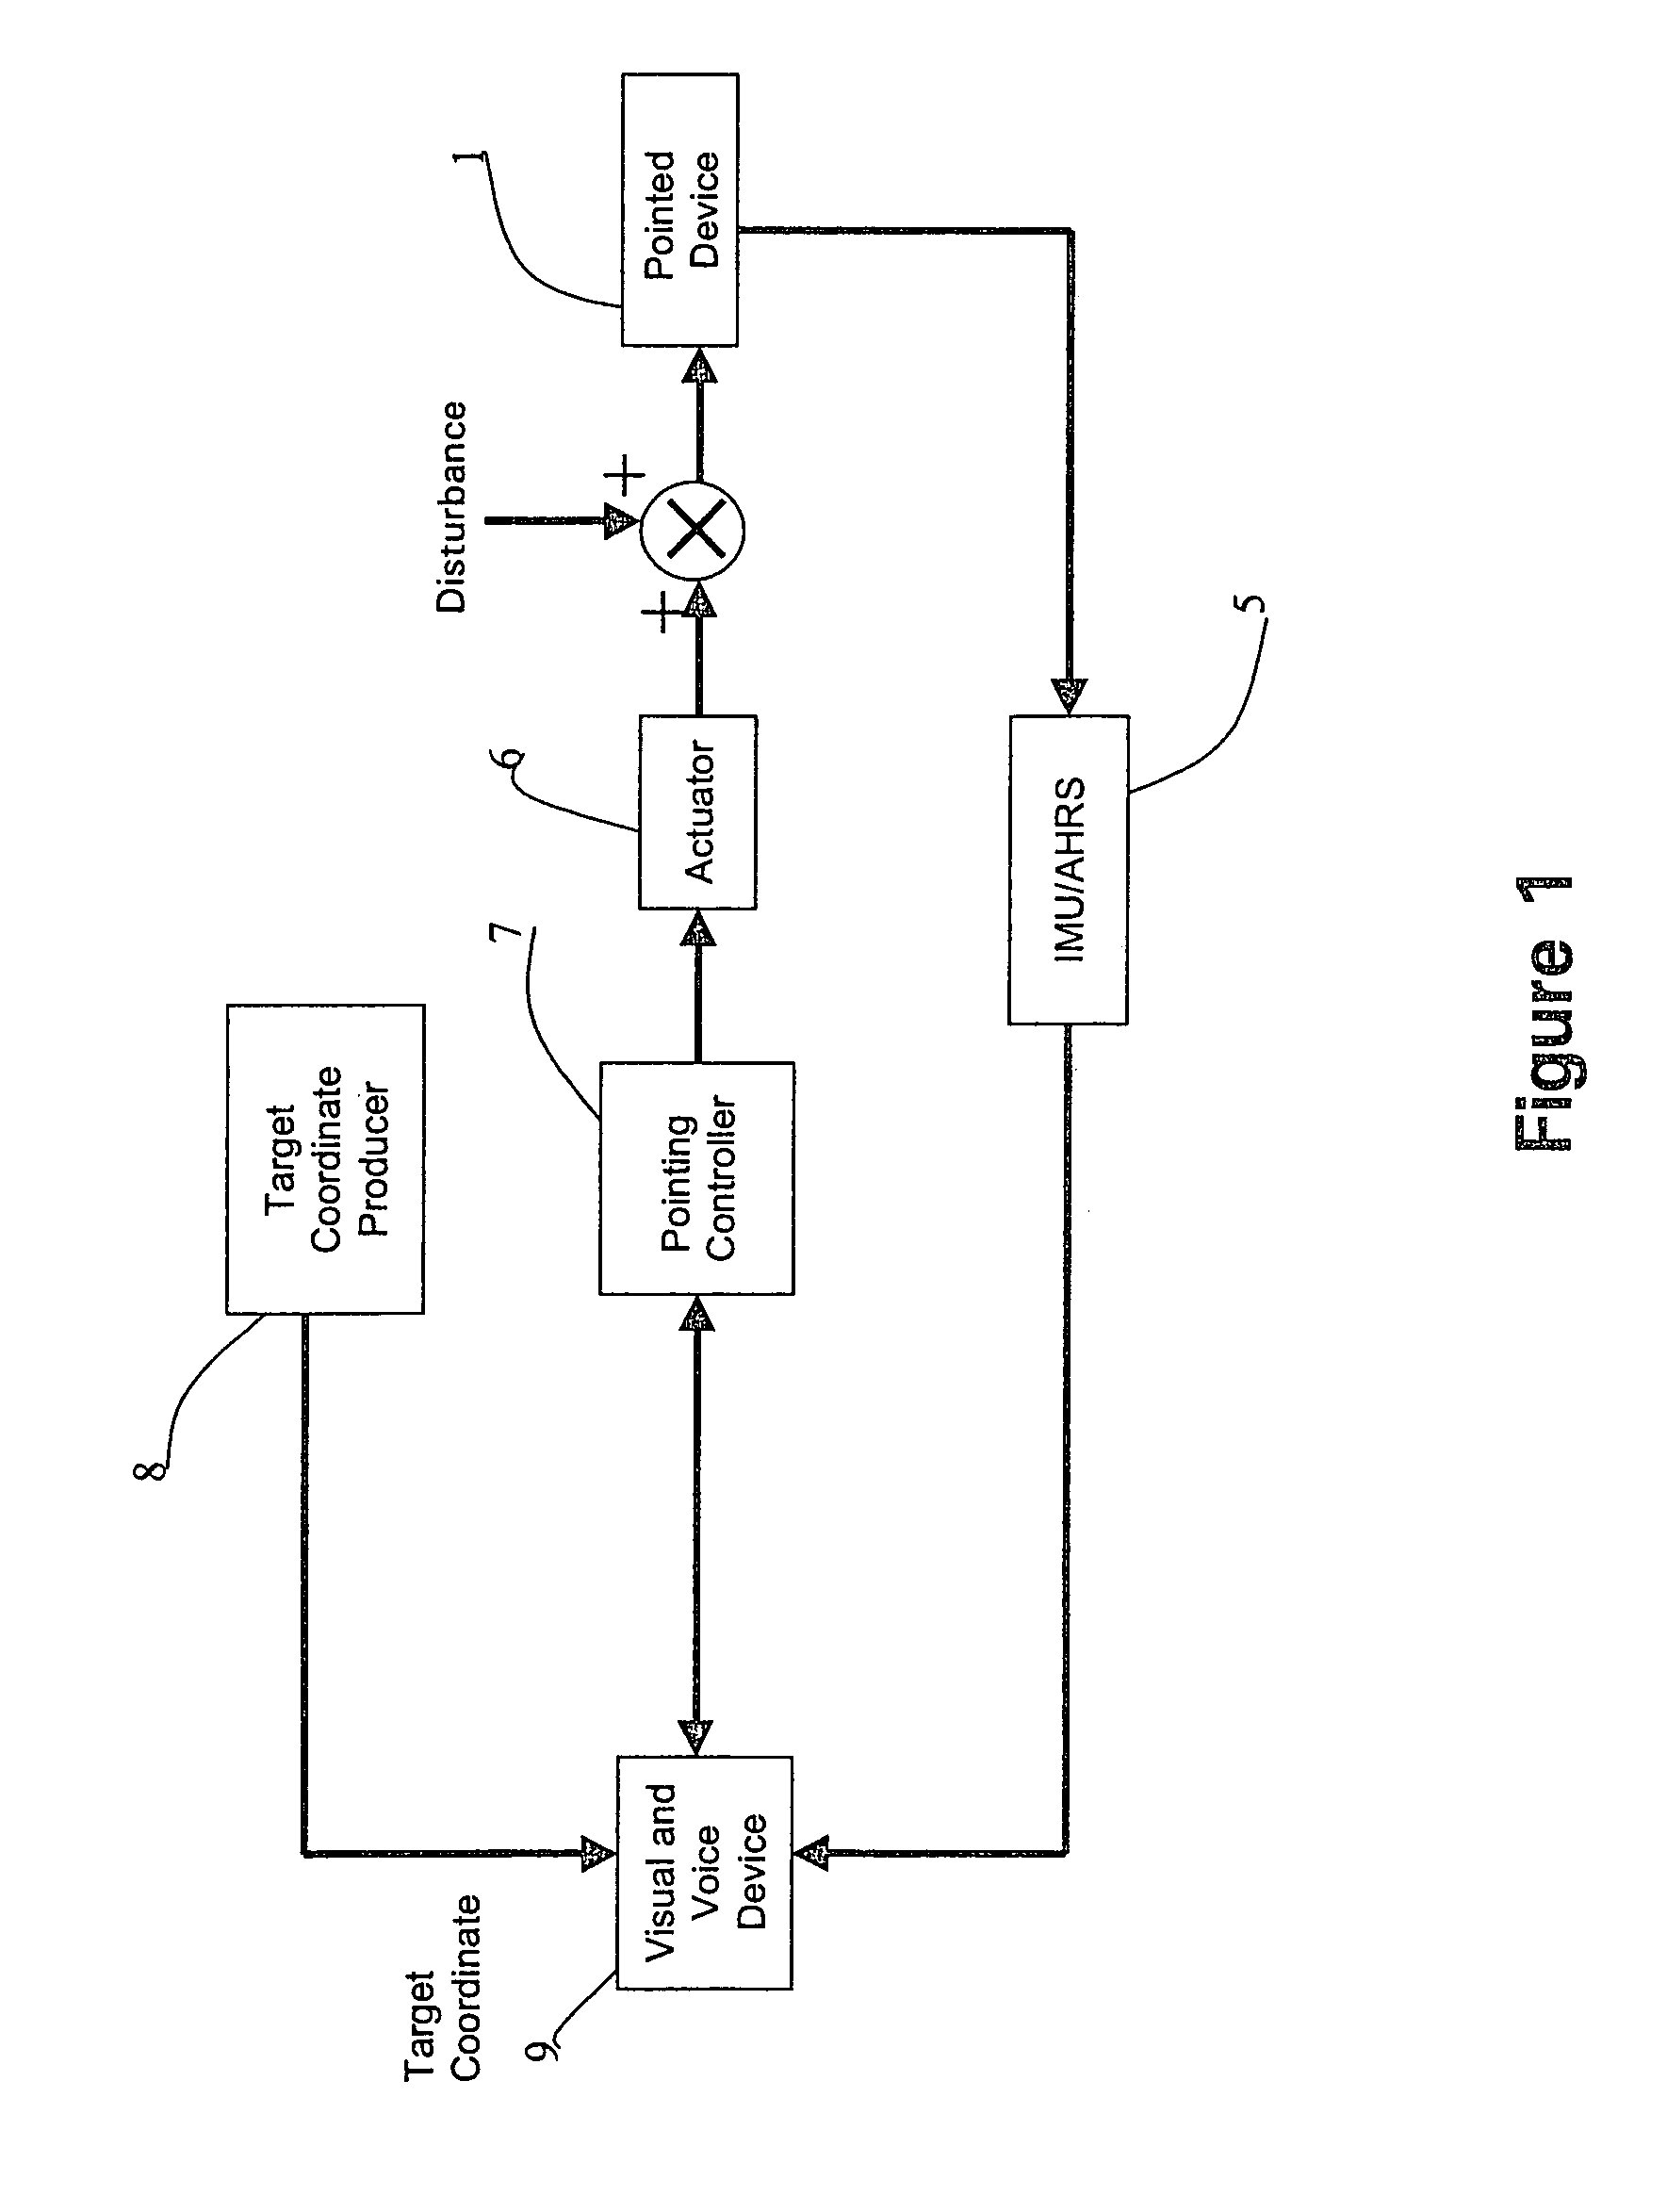 Method and system for automatic stabilization and pointing control of a device